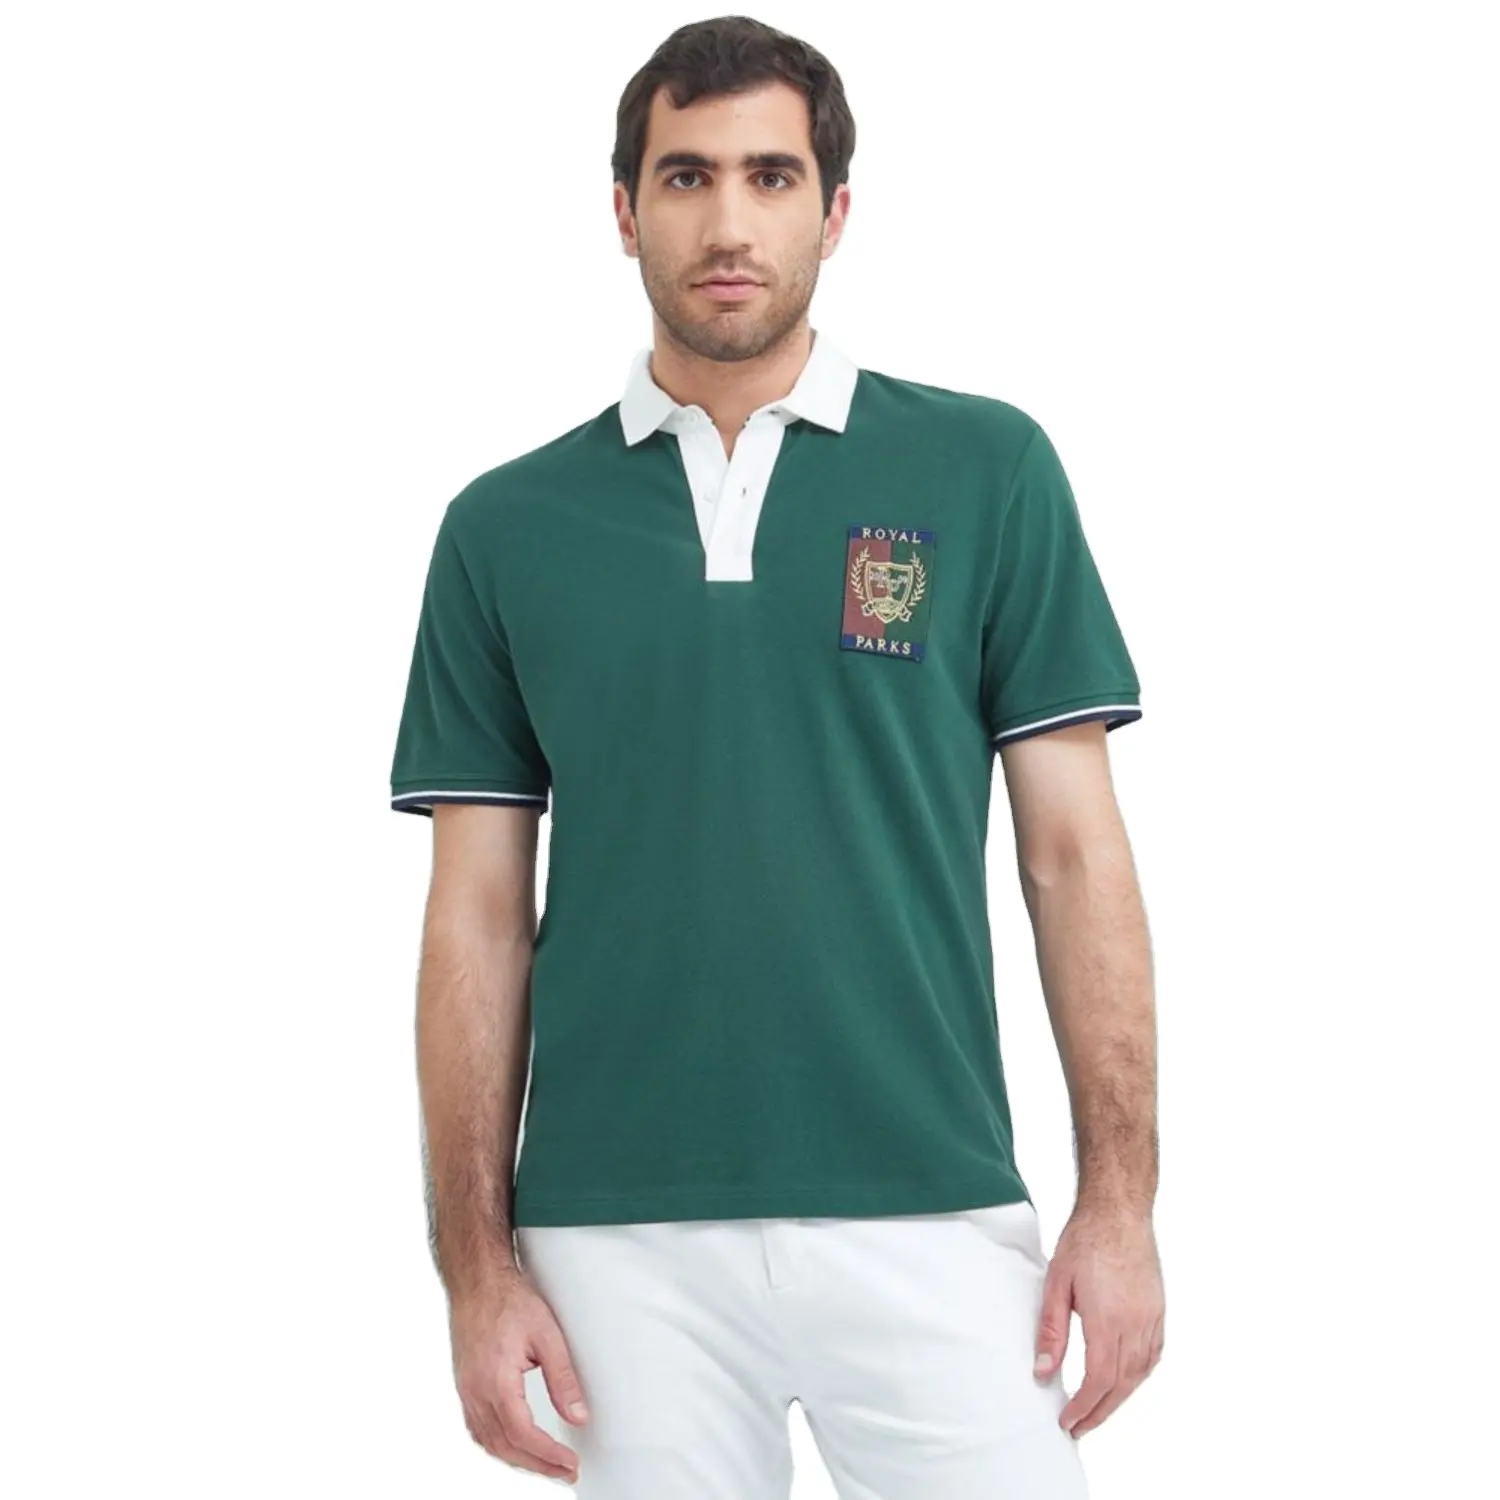 MENS POLO SHIRT PATCH ROYAL PARKS WOVEN FABRIC FOR COLLAR